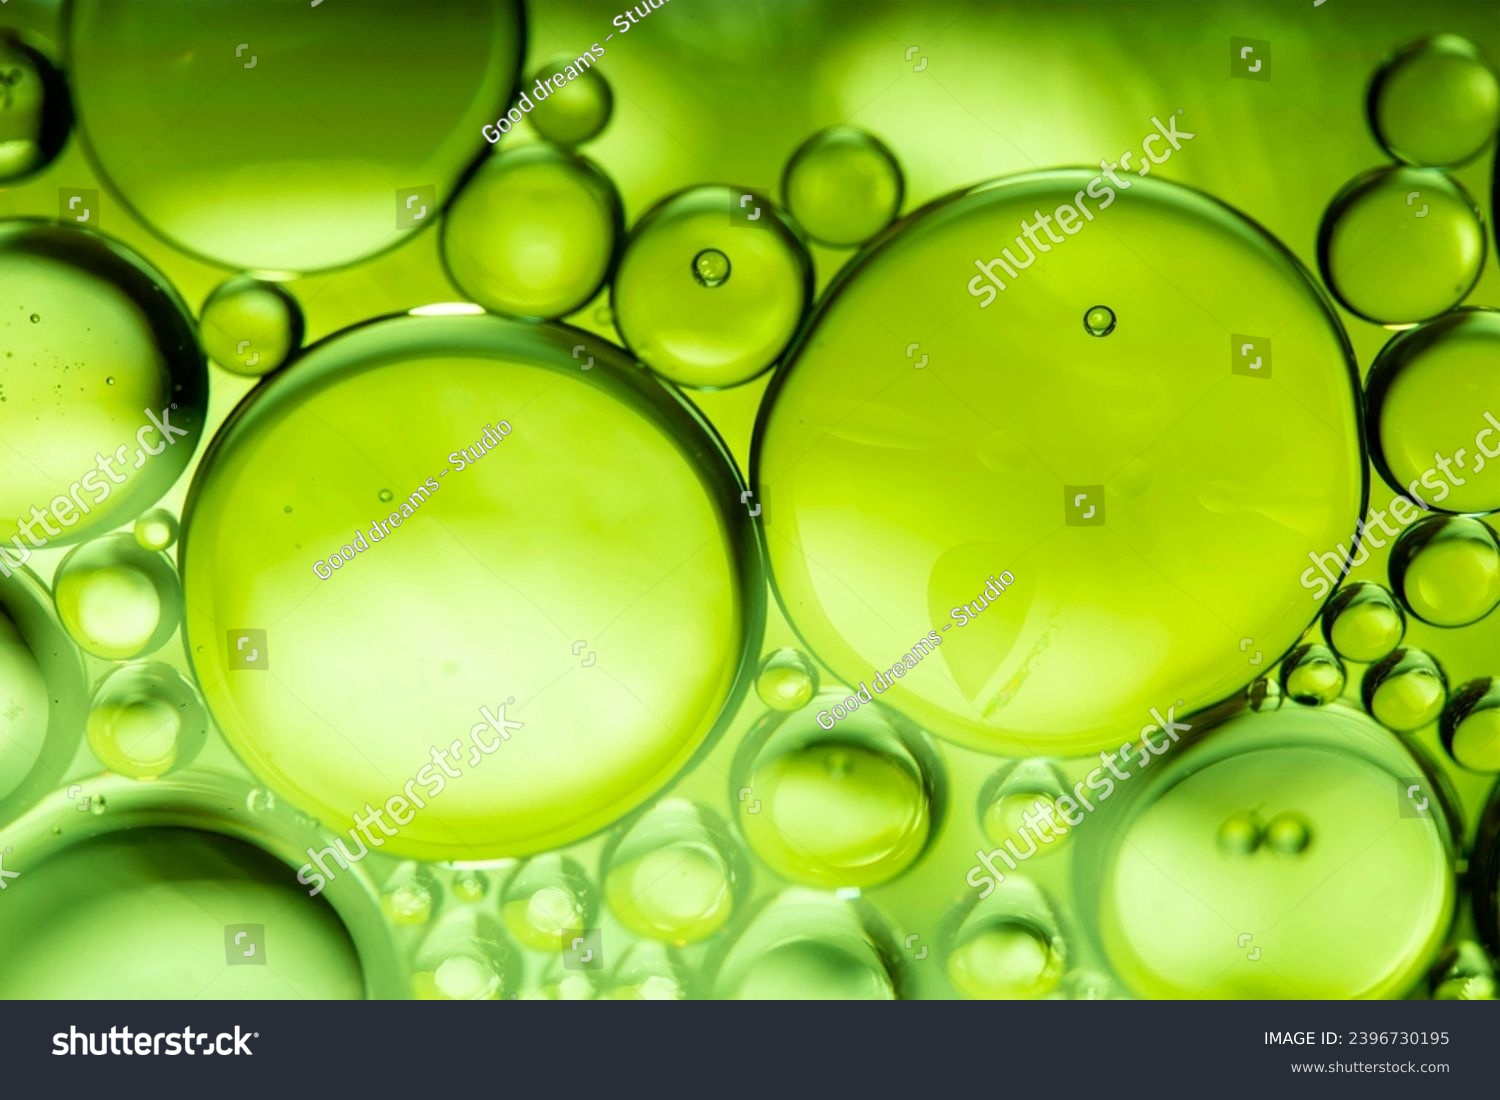 lemon drops of oil or serum texture background. Abstract lemon fluid with bubbles #2396730195